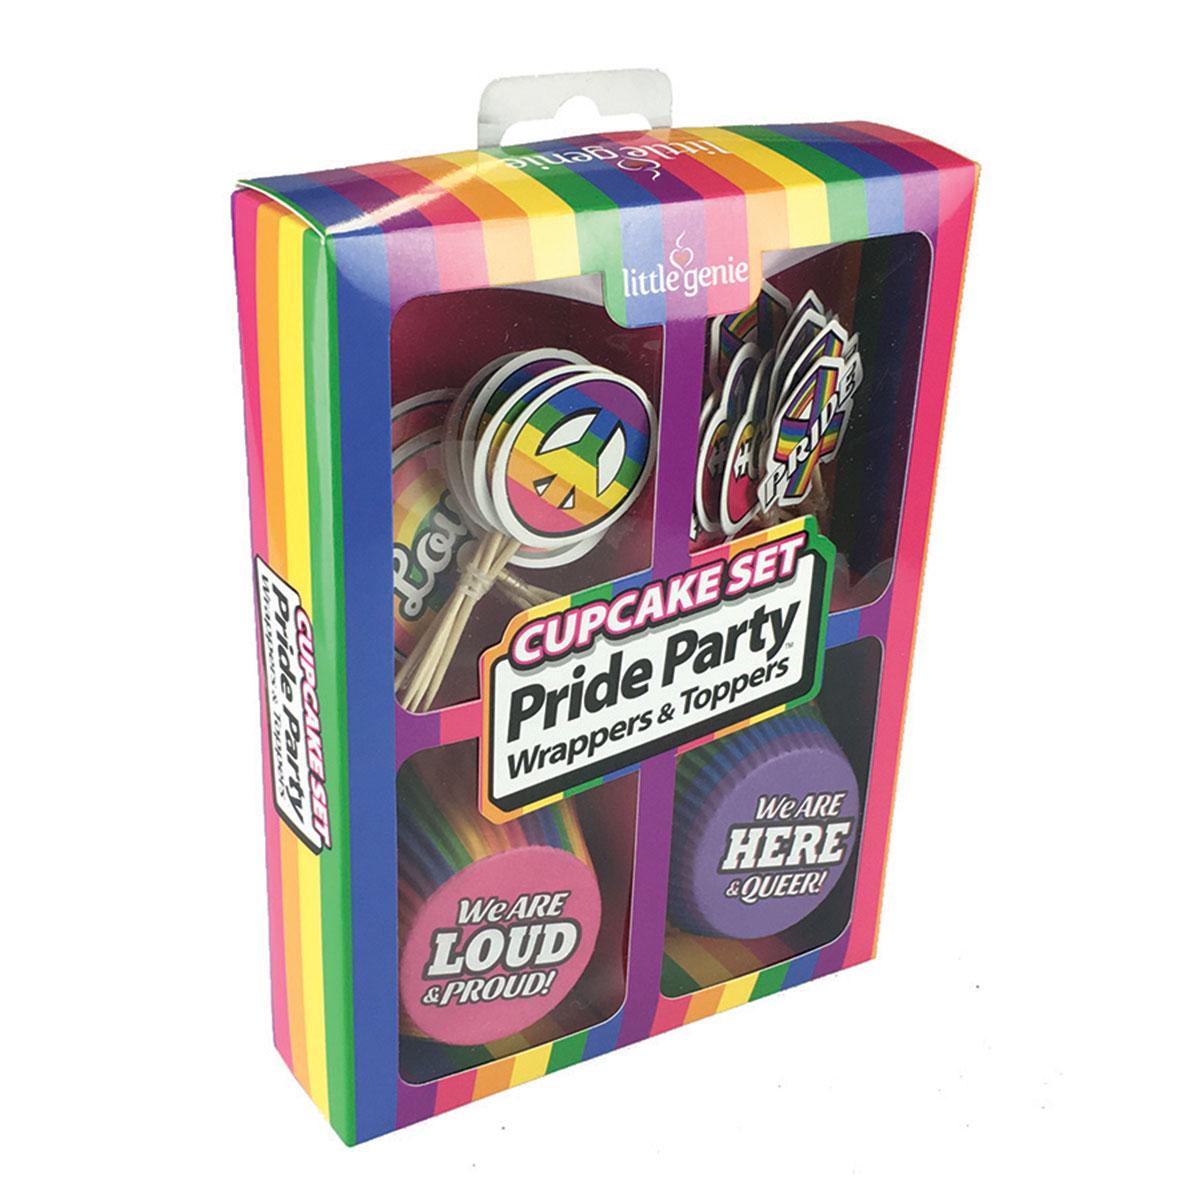 Load image into Gallery viewer, Cupcake Set - Pride
